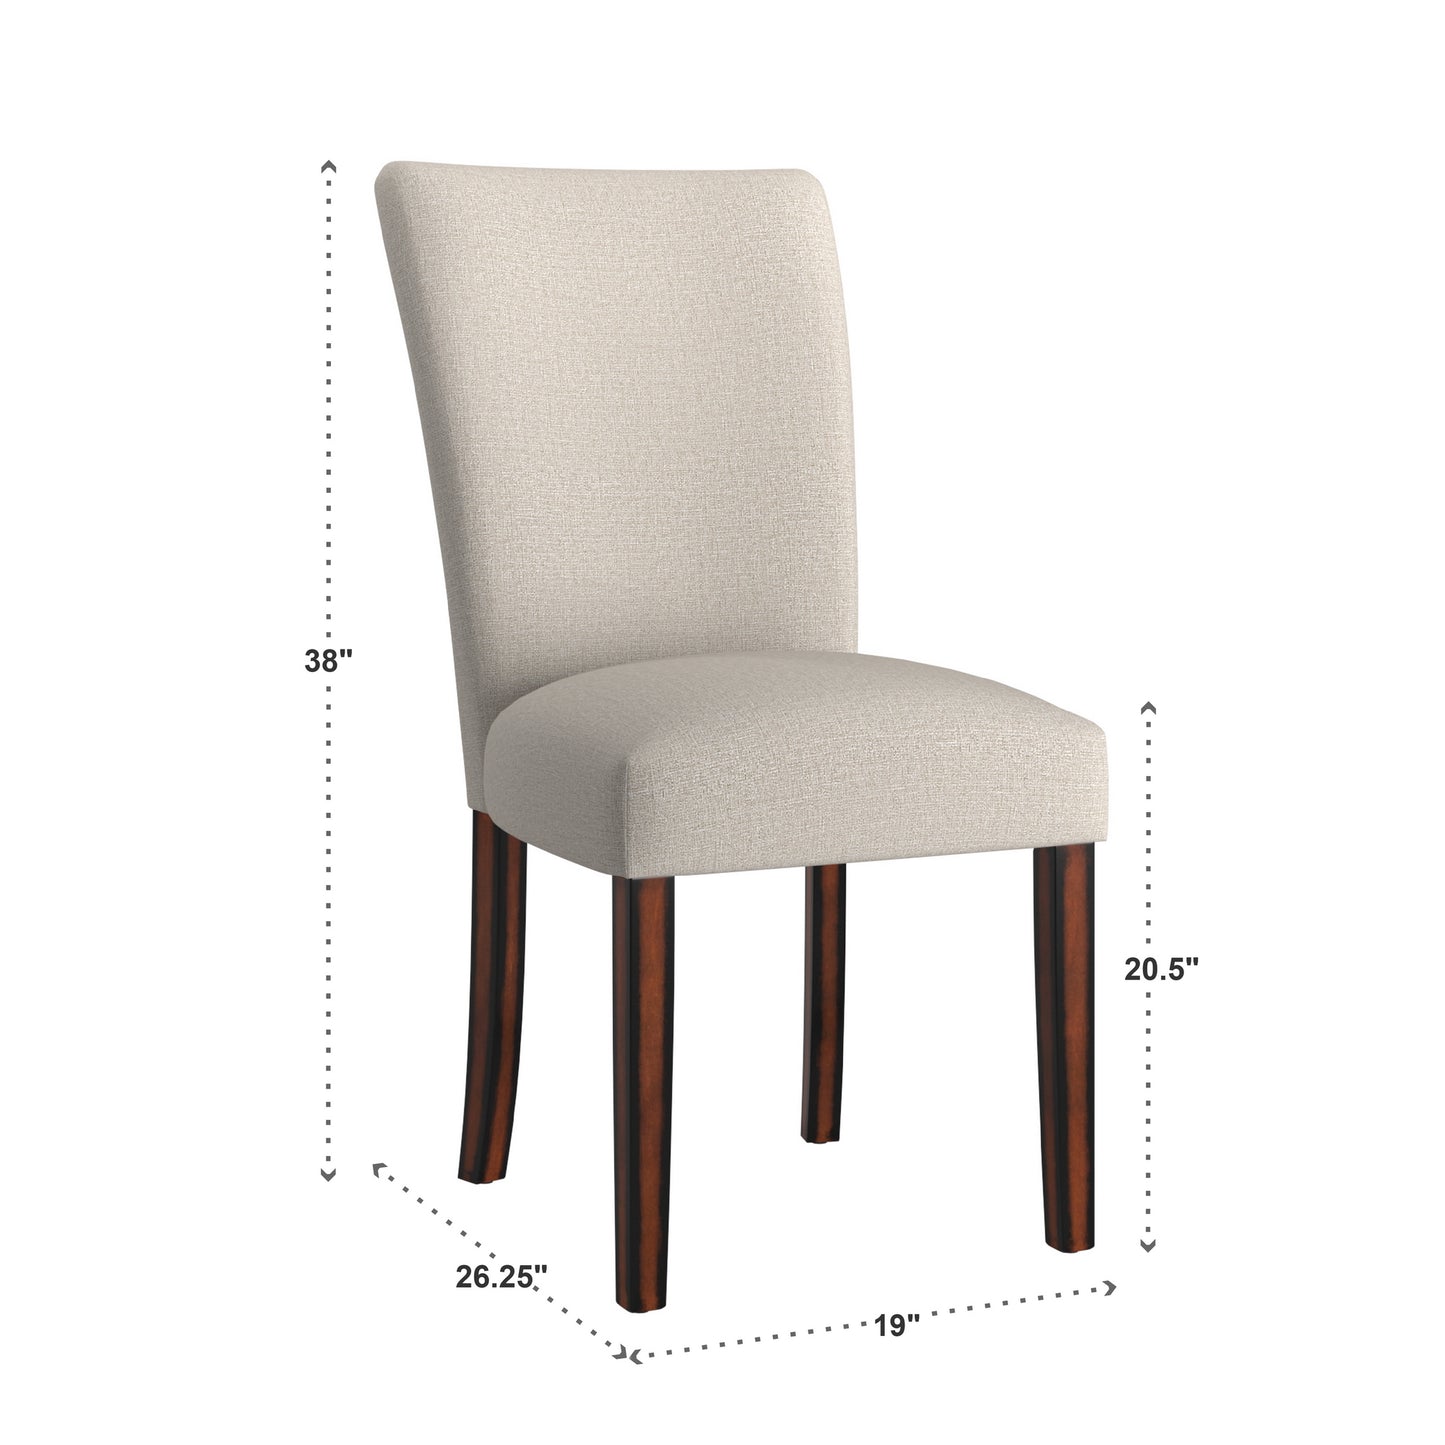 Upholstered Parson Dining Chairs (Set of 2) - Espresso Finish, Beige Heathered Weave